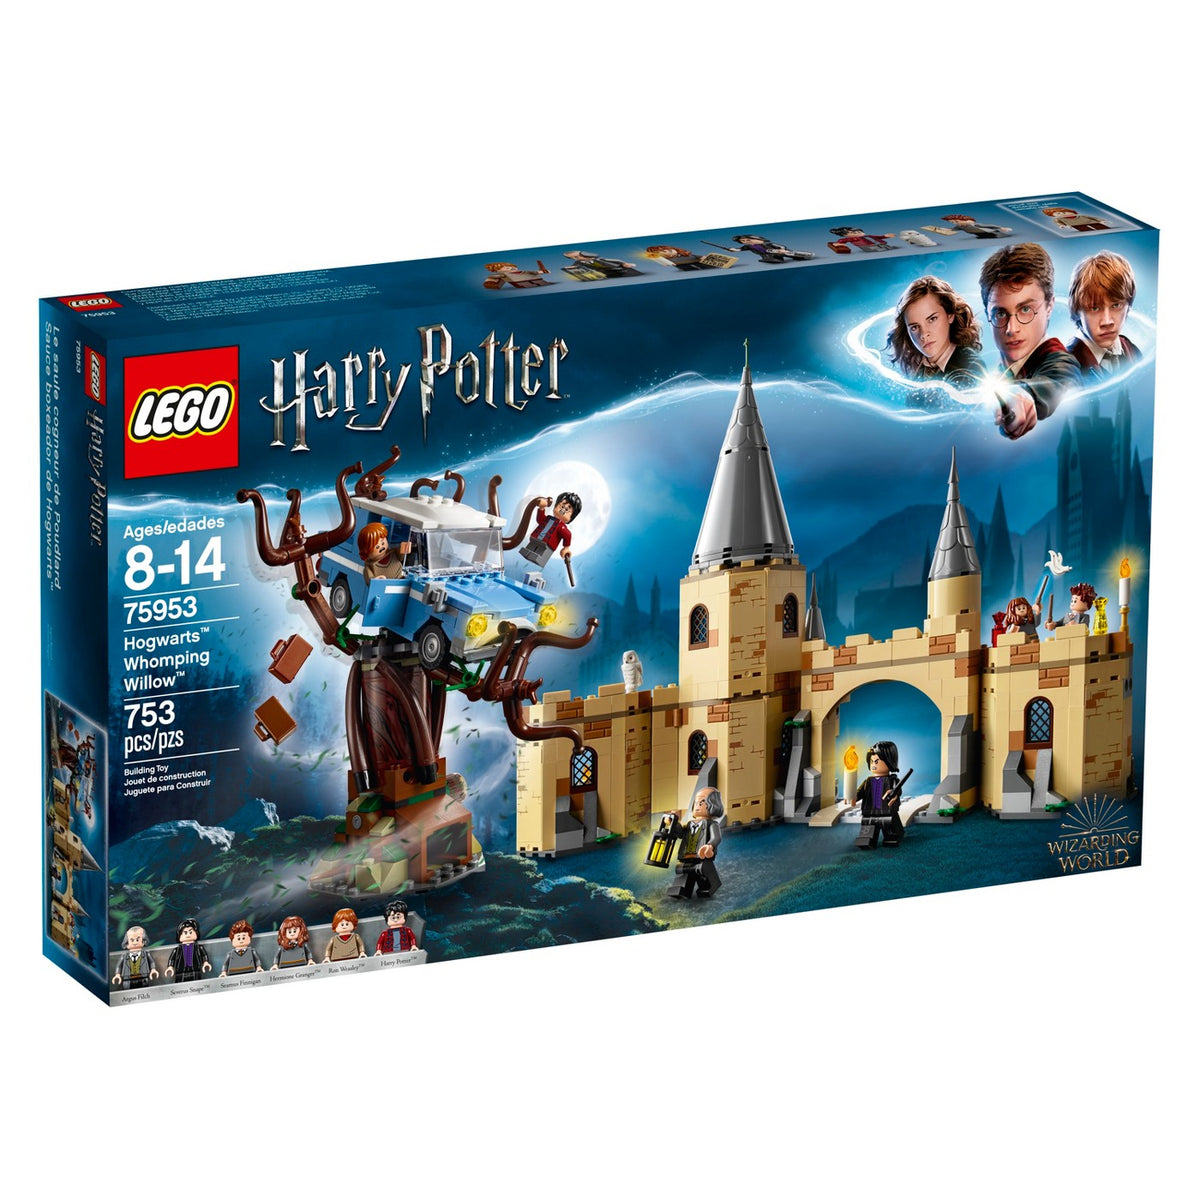 LEGO® Harry Potter™ 75953 Hogwarts™ Whomping Willow (753 Pieces